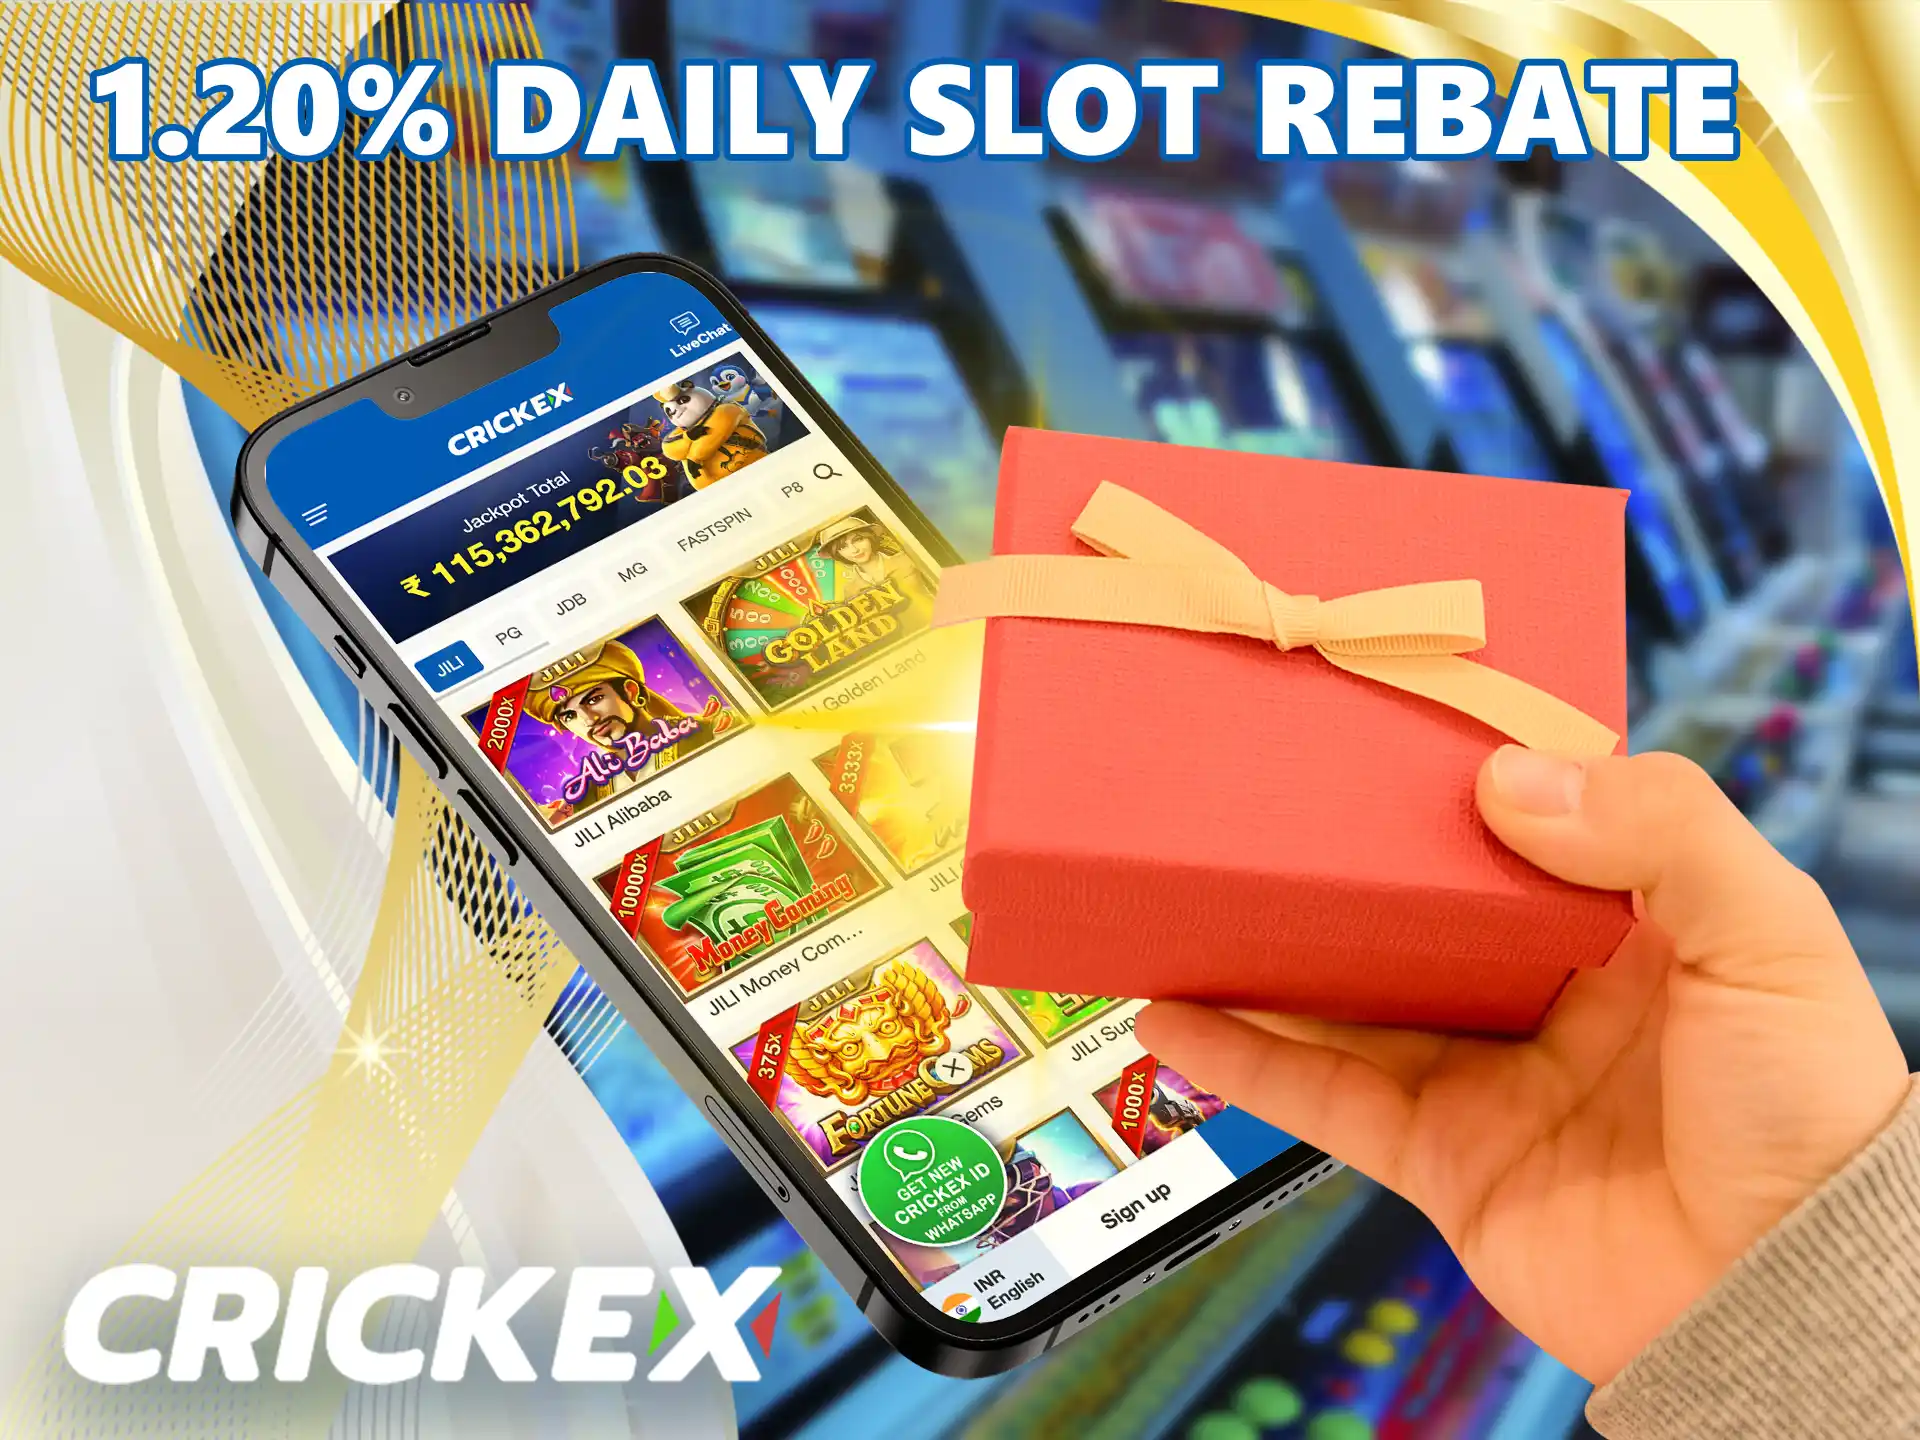 By playing the machines you can get a return on your account of 0.8% to 1.2% at Crickex.